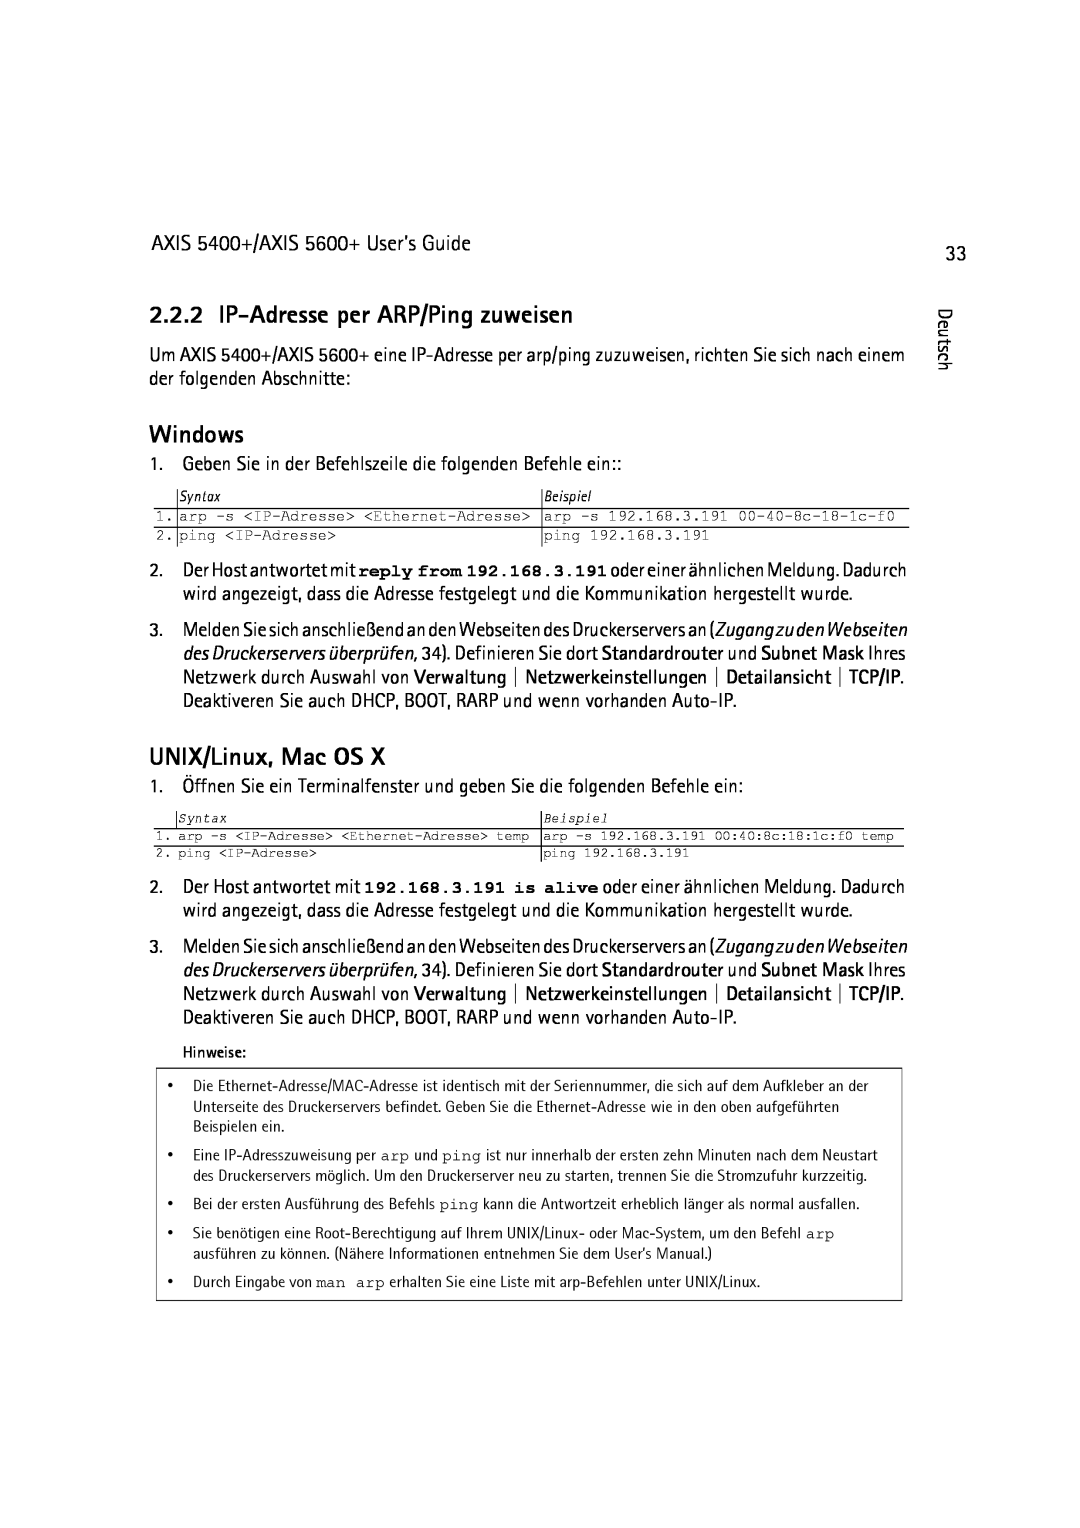 Dell IP-Adresse per ARP/Ping zuweisen, Windows, UNIX/Linux, Mac OS, AXIS 5400+/AXIS 5600+ User’s Guide, Hinweise, ping 